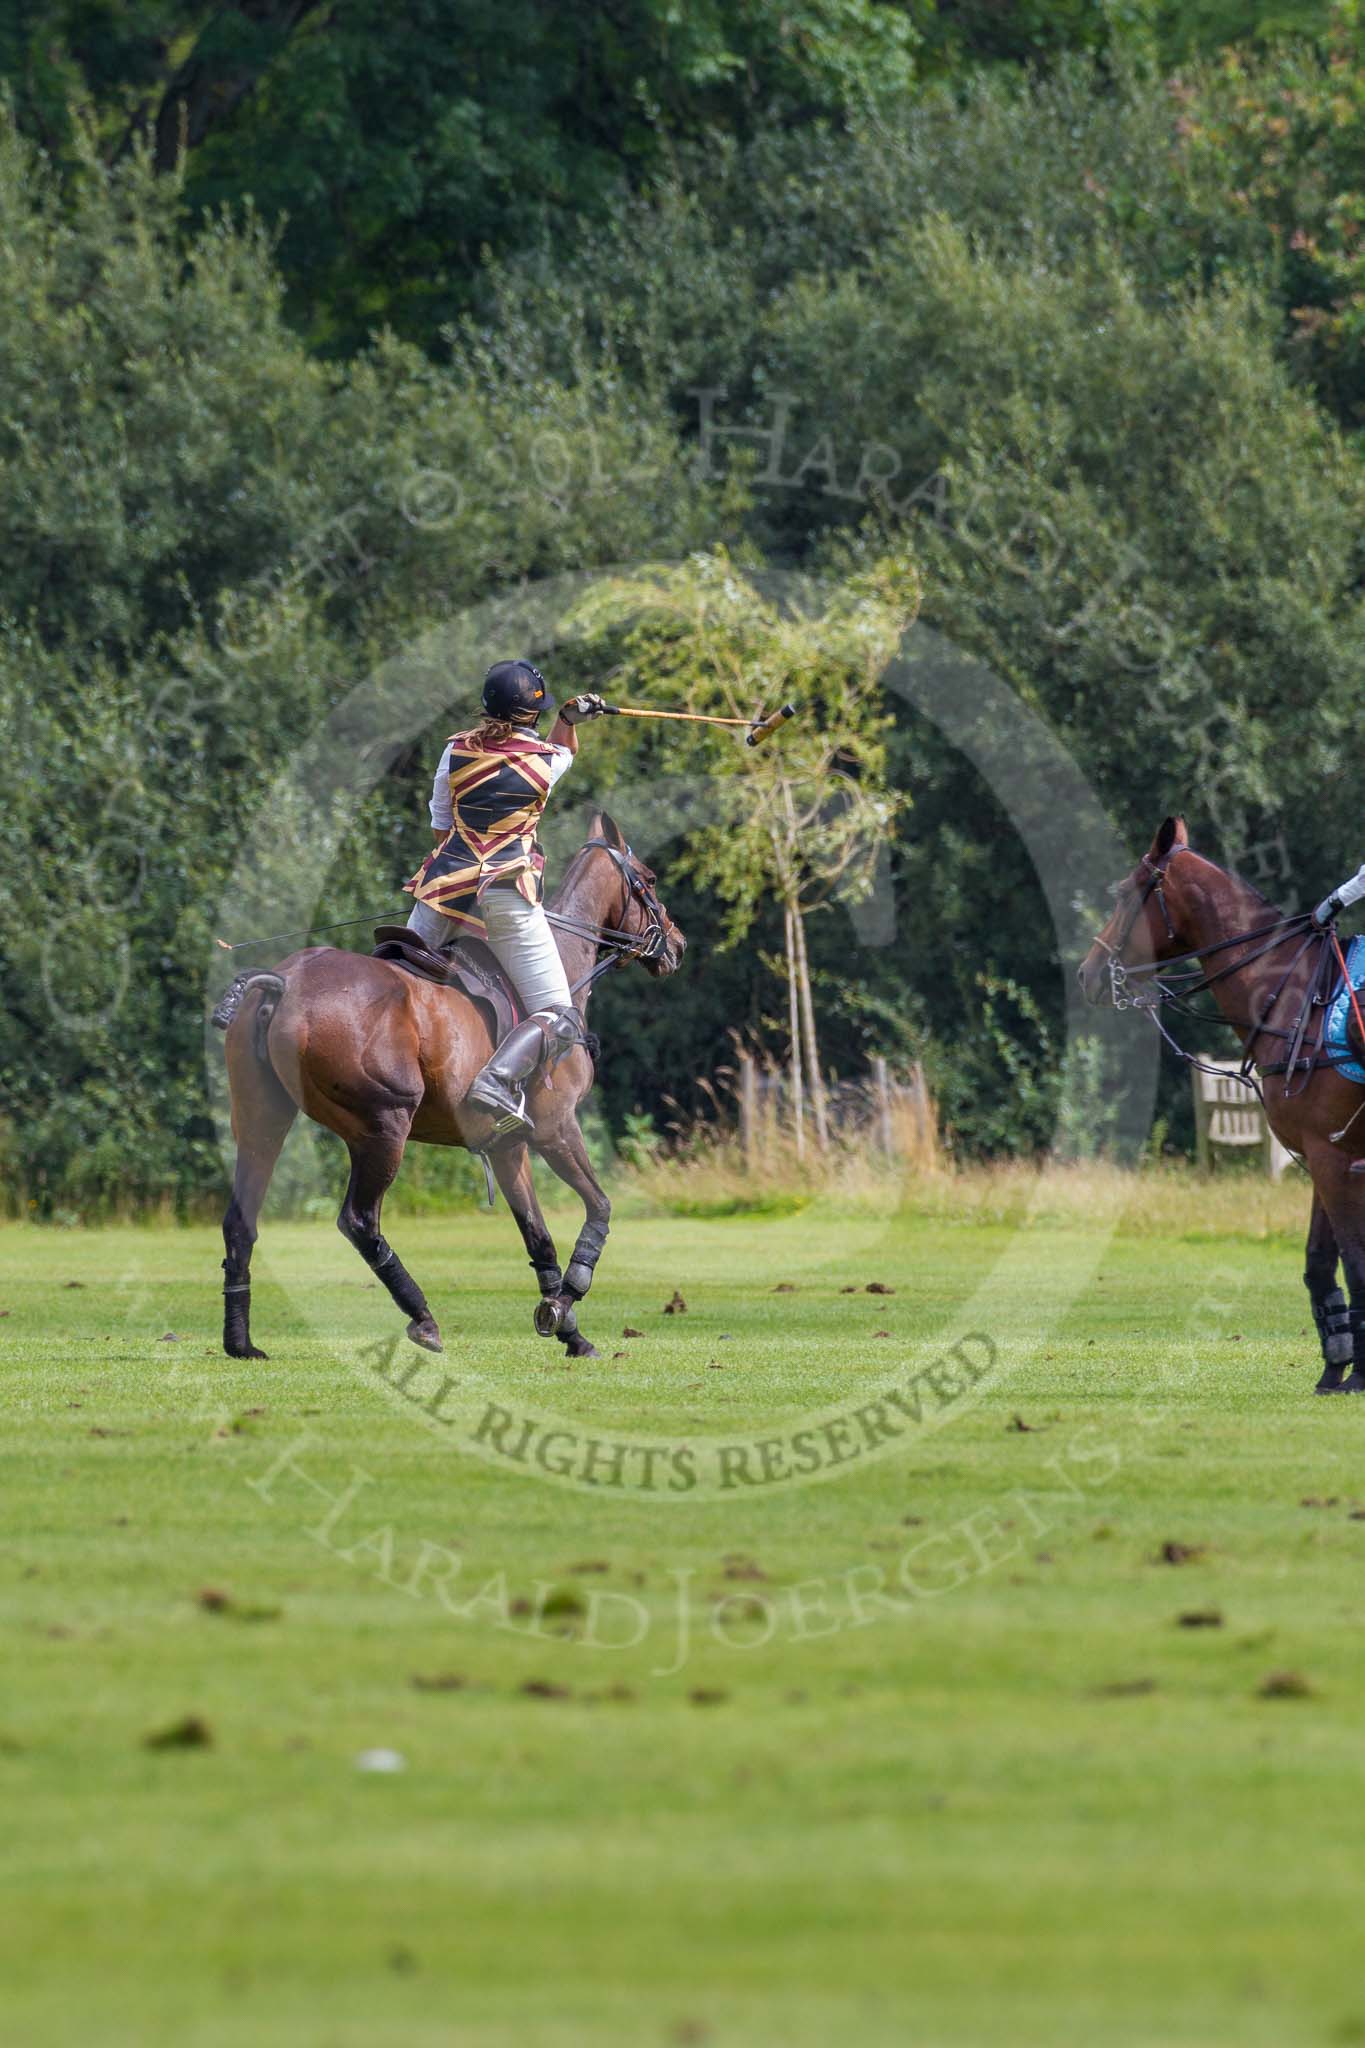 7th Heritage Polo Cup semi-finals: Rosie Ross..
Hurtwood Park Polo Club,
Ewhurst Green,
Surrey,
United Kingdom,
on 04 August 2012 at 14:43, image #222